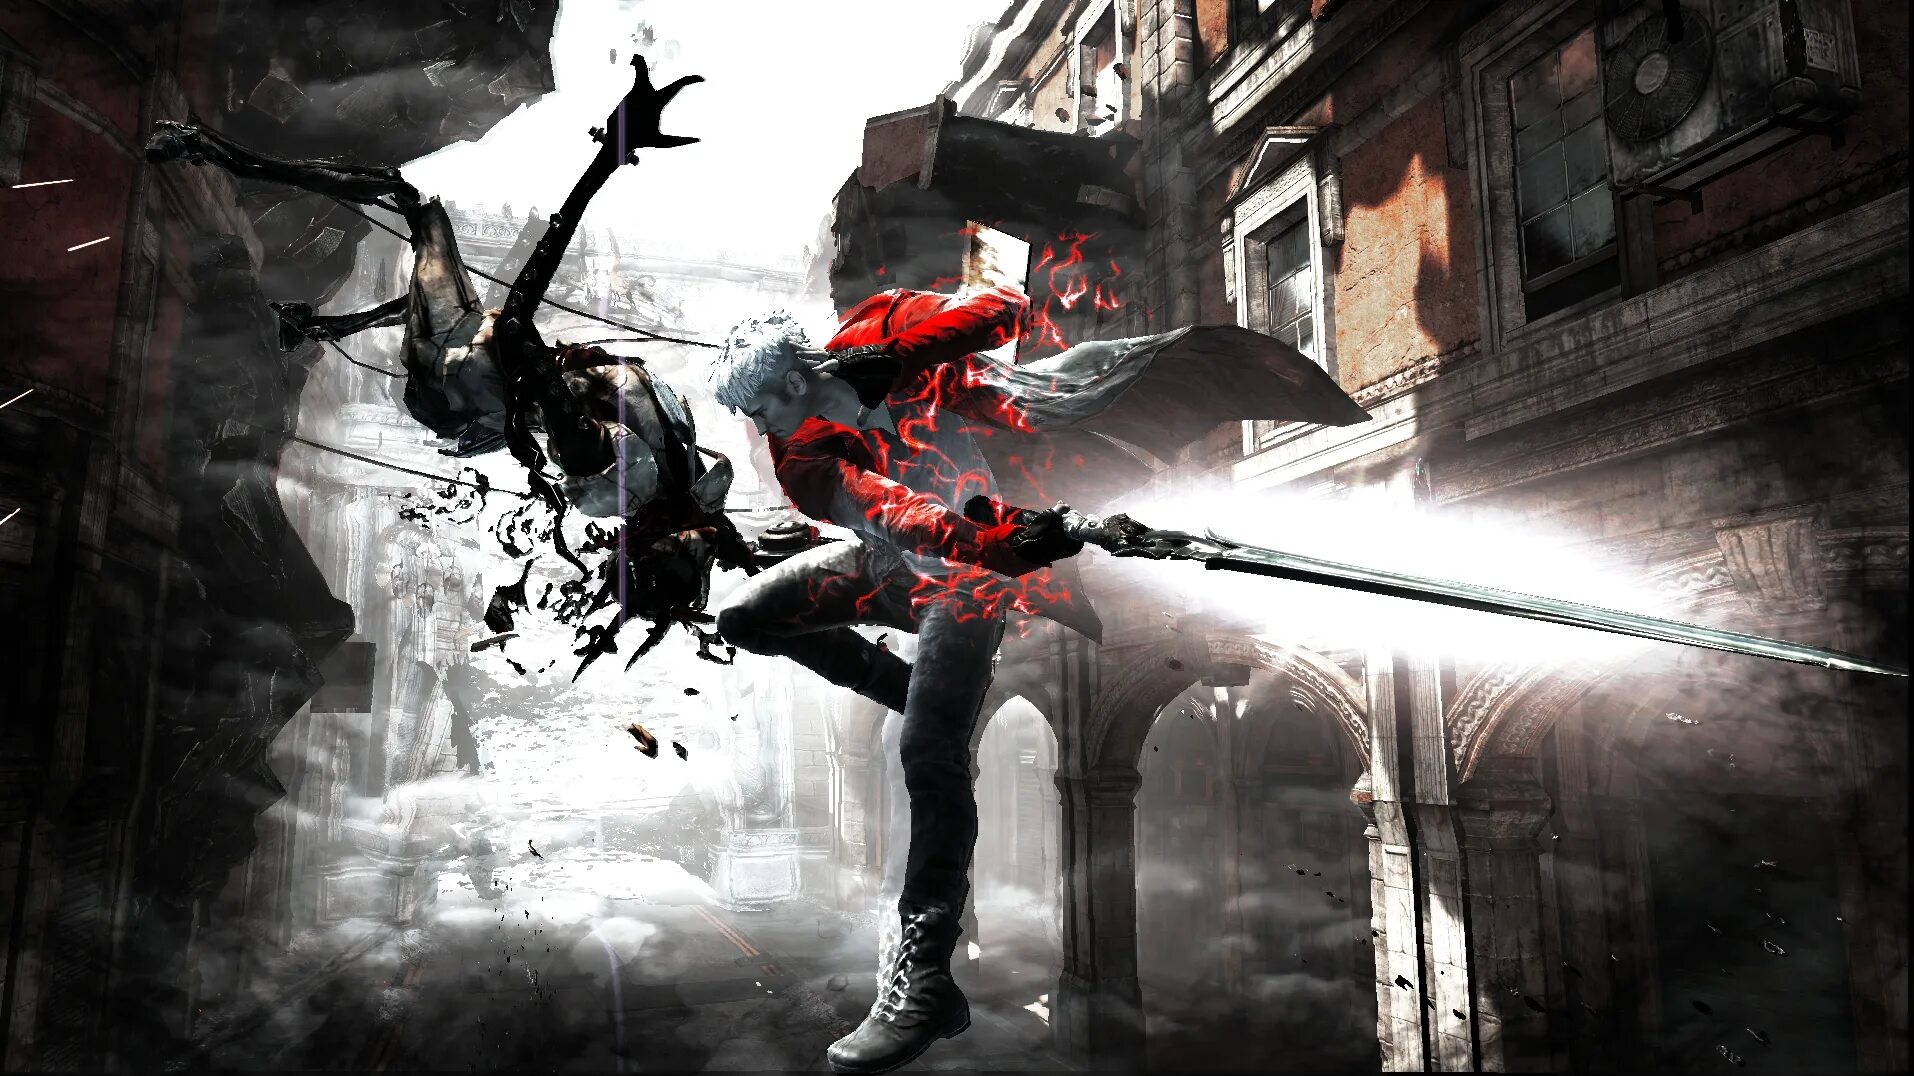 Games devil may cry. DMC Devil May Cry. DMC: Devil May Cry. Definitive Edition. Devil May Cry ps3. DMC Devil May Cry 2013.